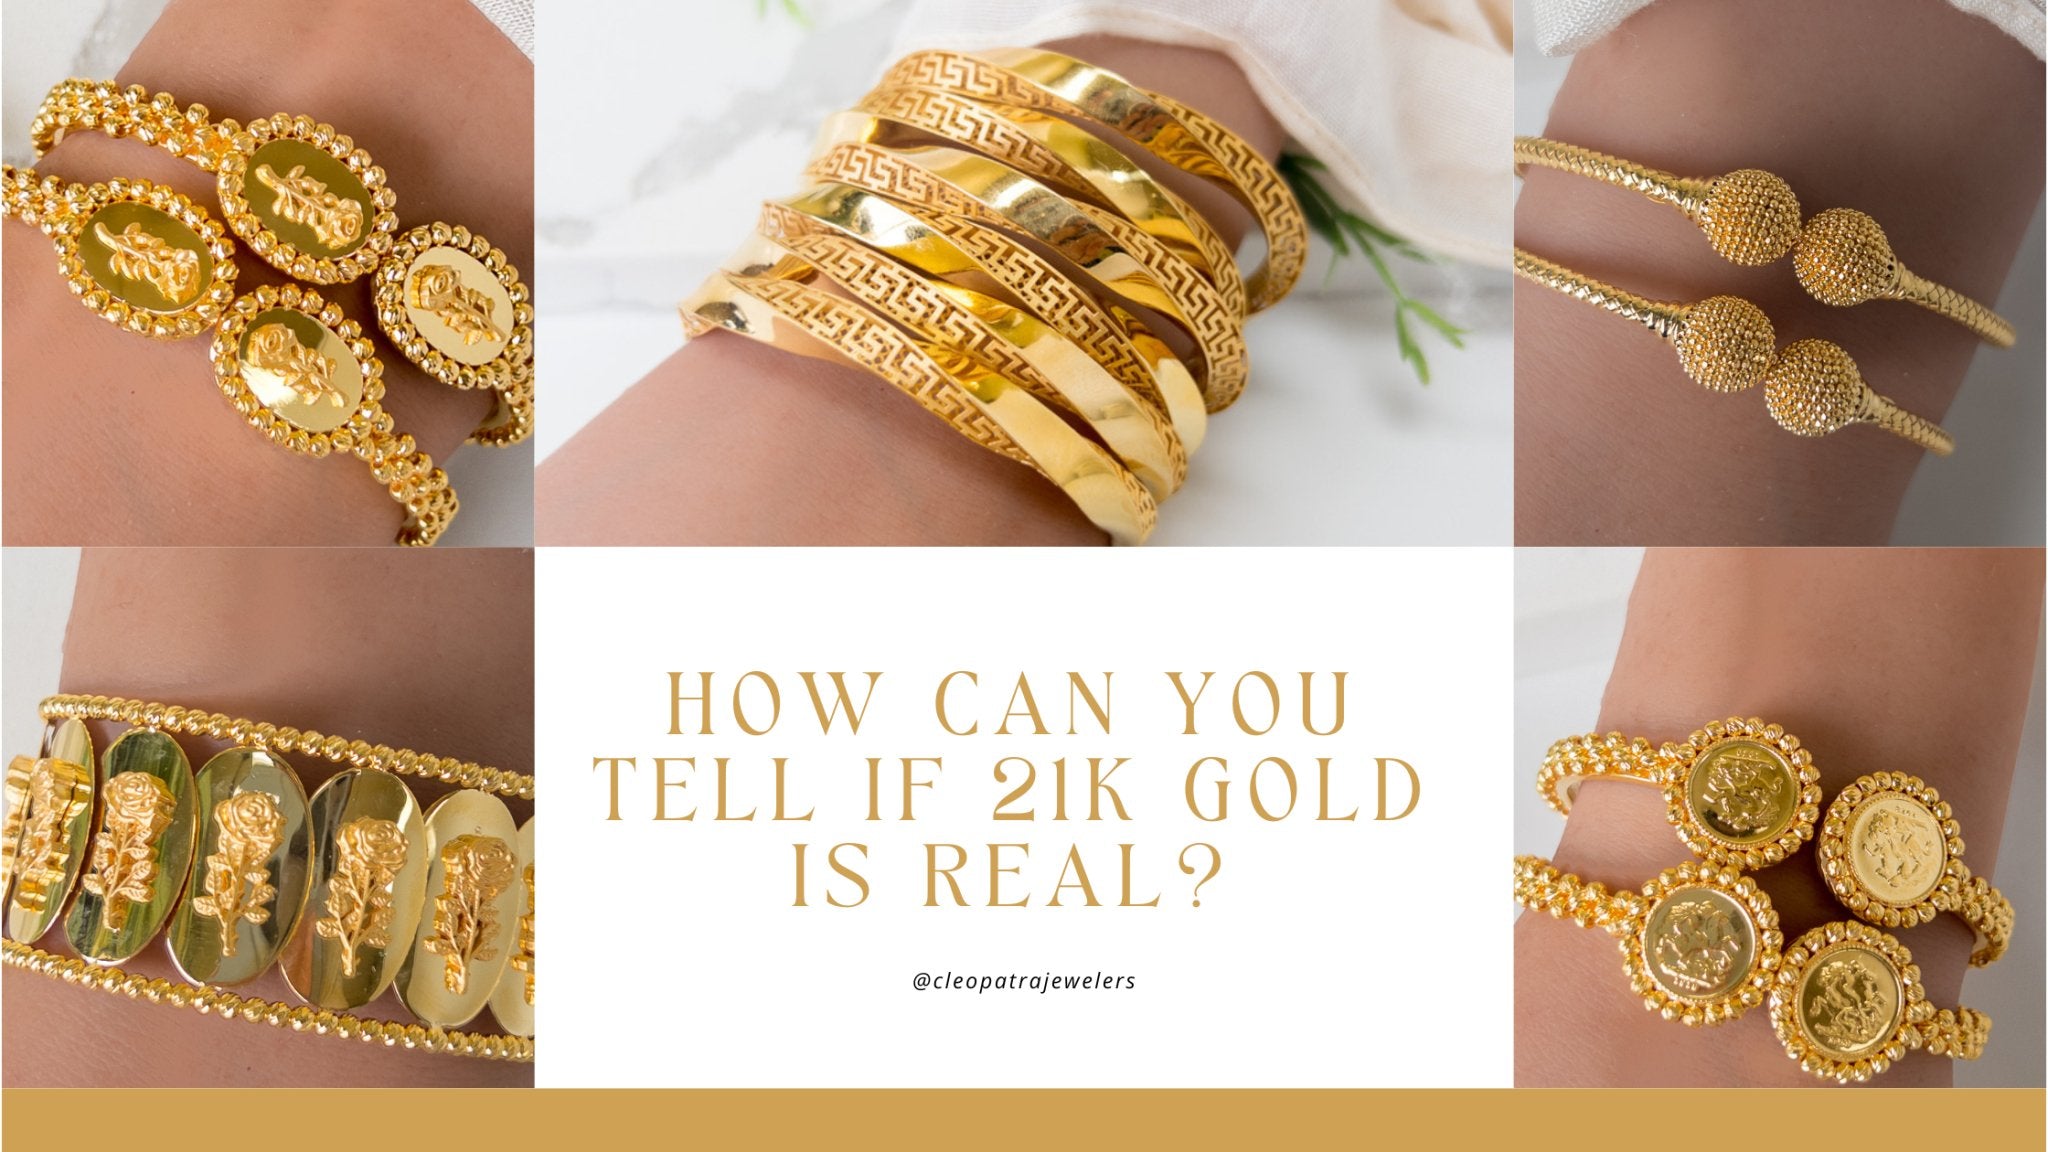 How can you tell if 21k gold is real? - Cleopatra Jewelers